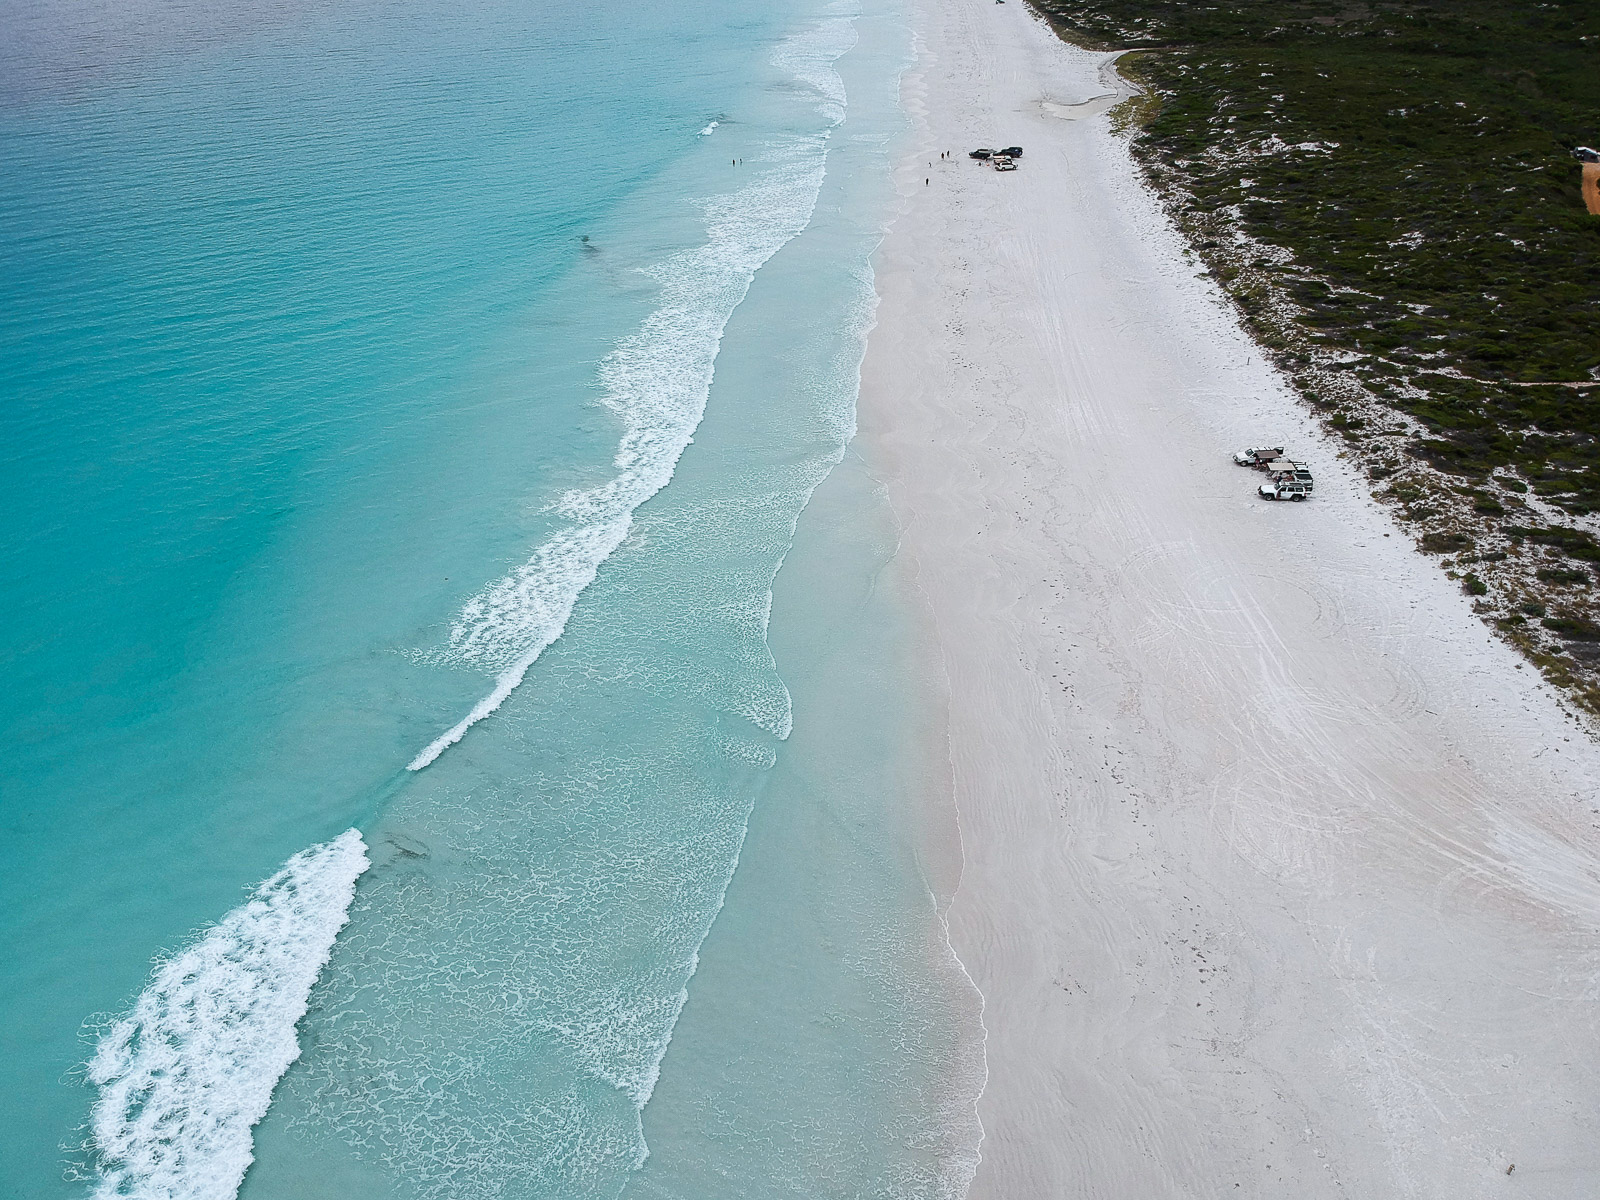 A drone shot of 4WD vehicles parked on a white sand beach with turquoise ocean